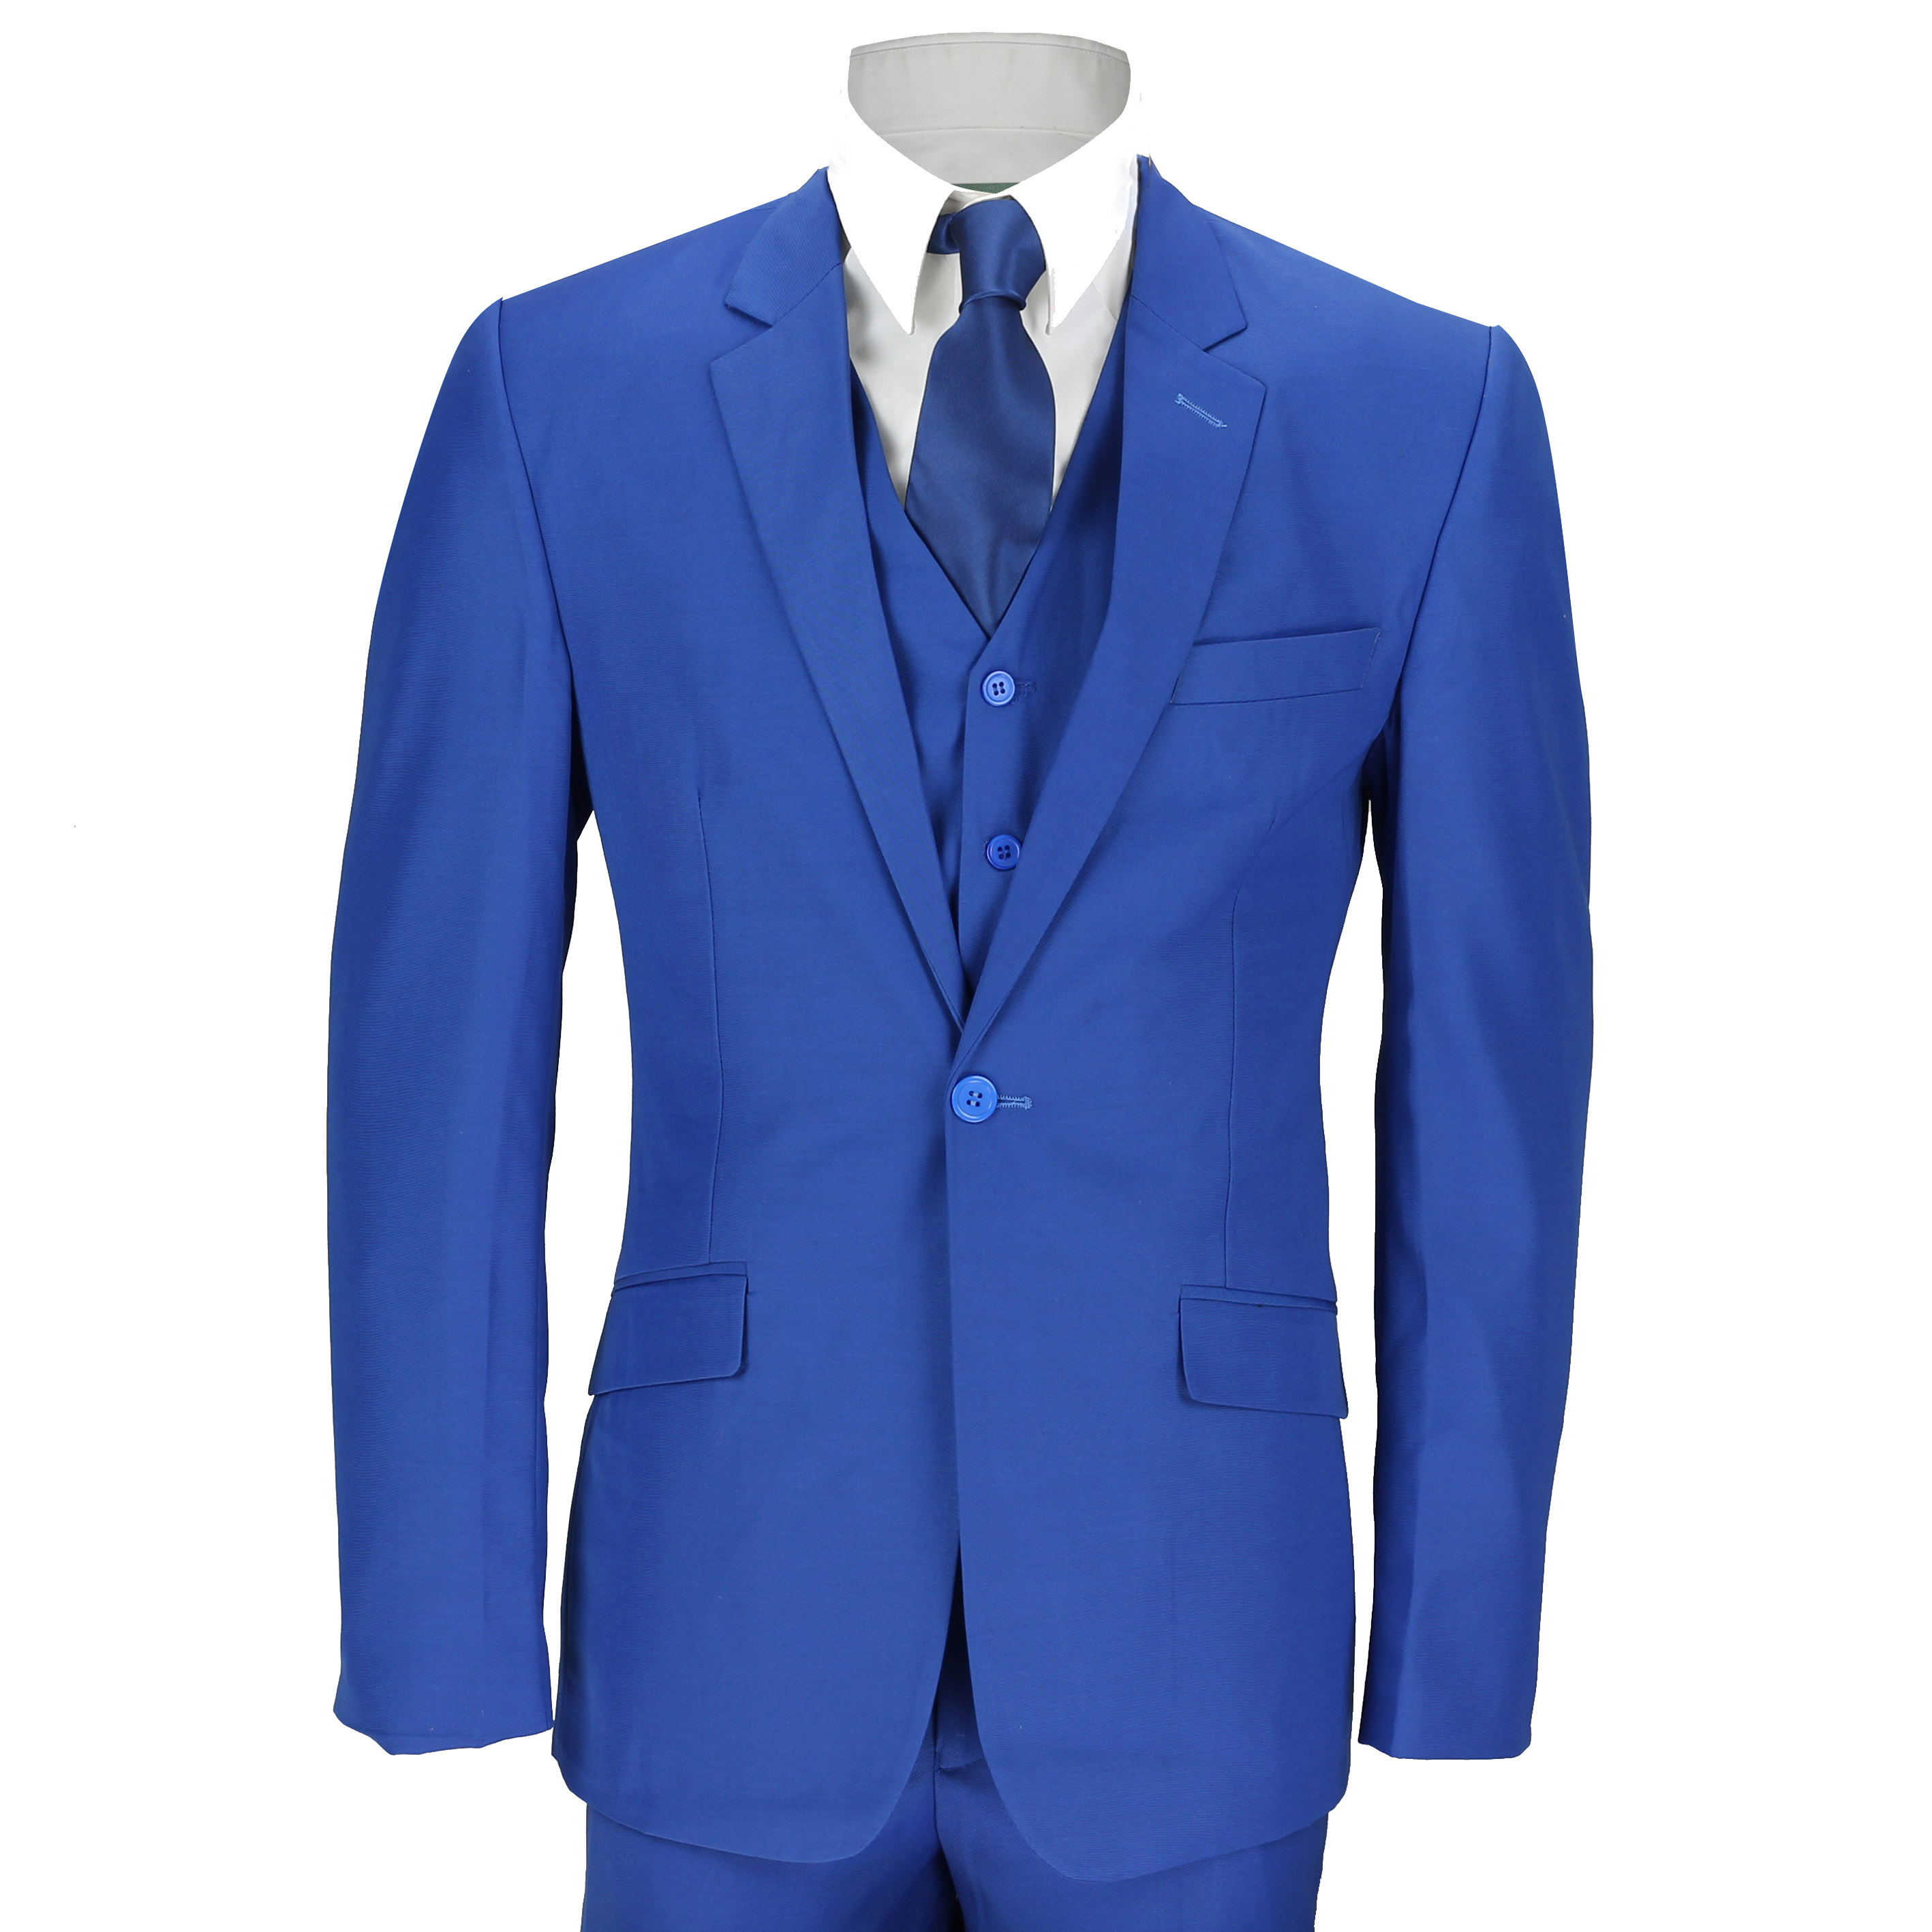 New Mens 3 Piece Suit Royal Blue Tailored Fit Smart Casual Formal ...